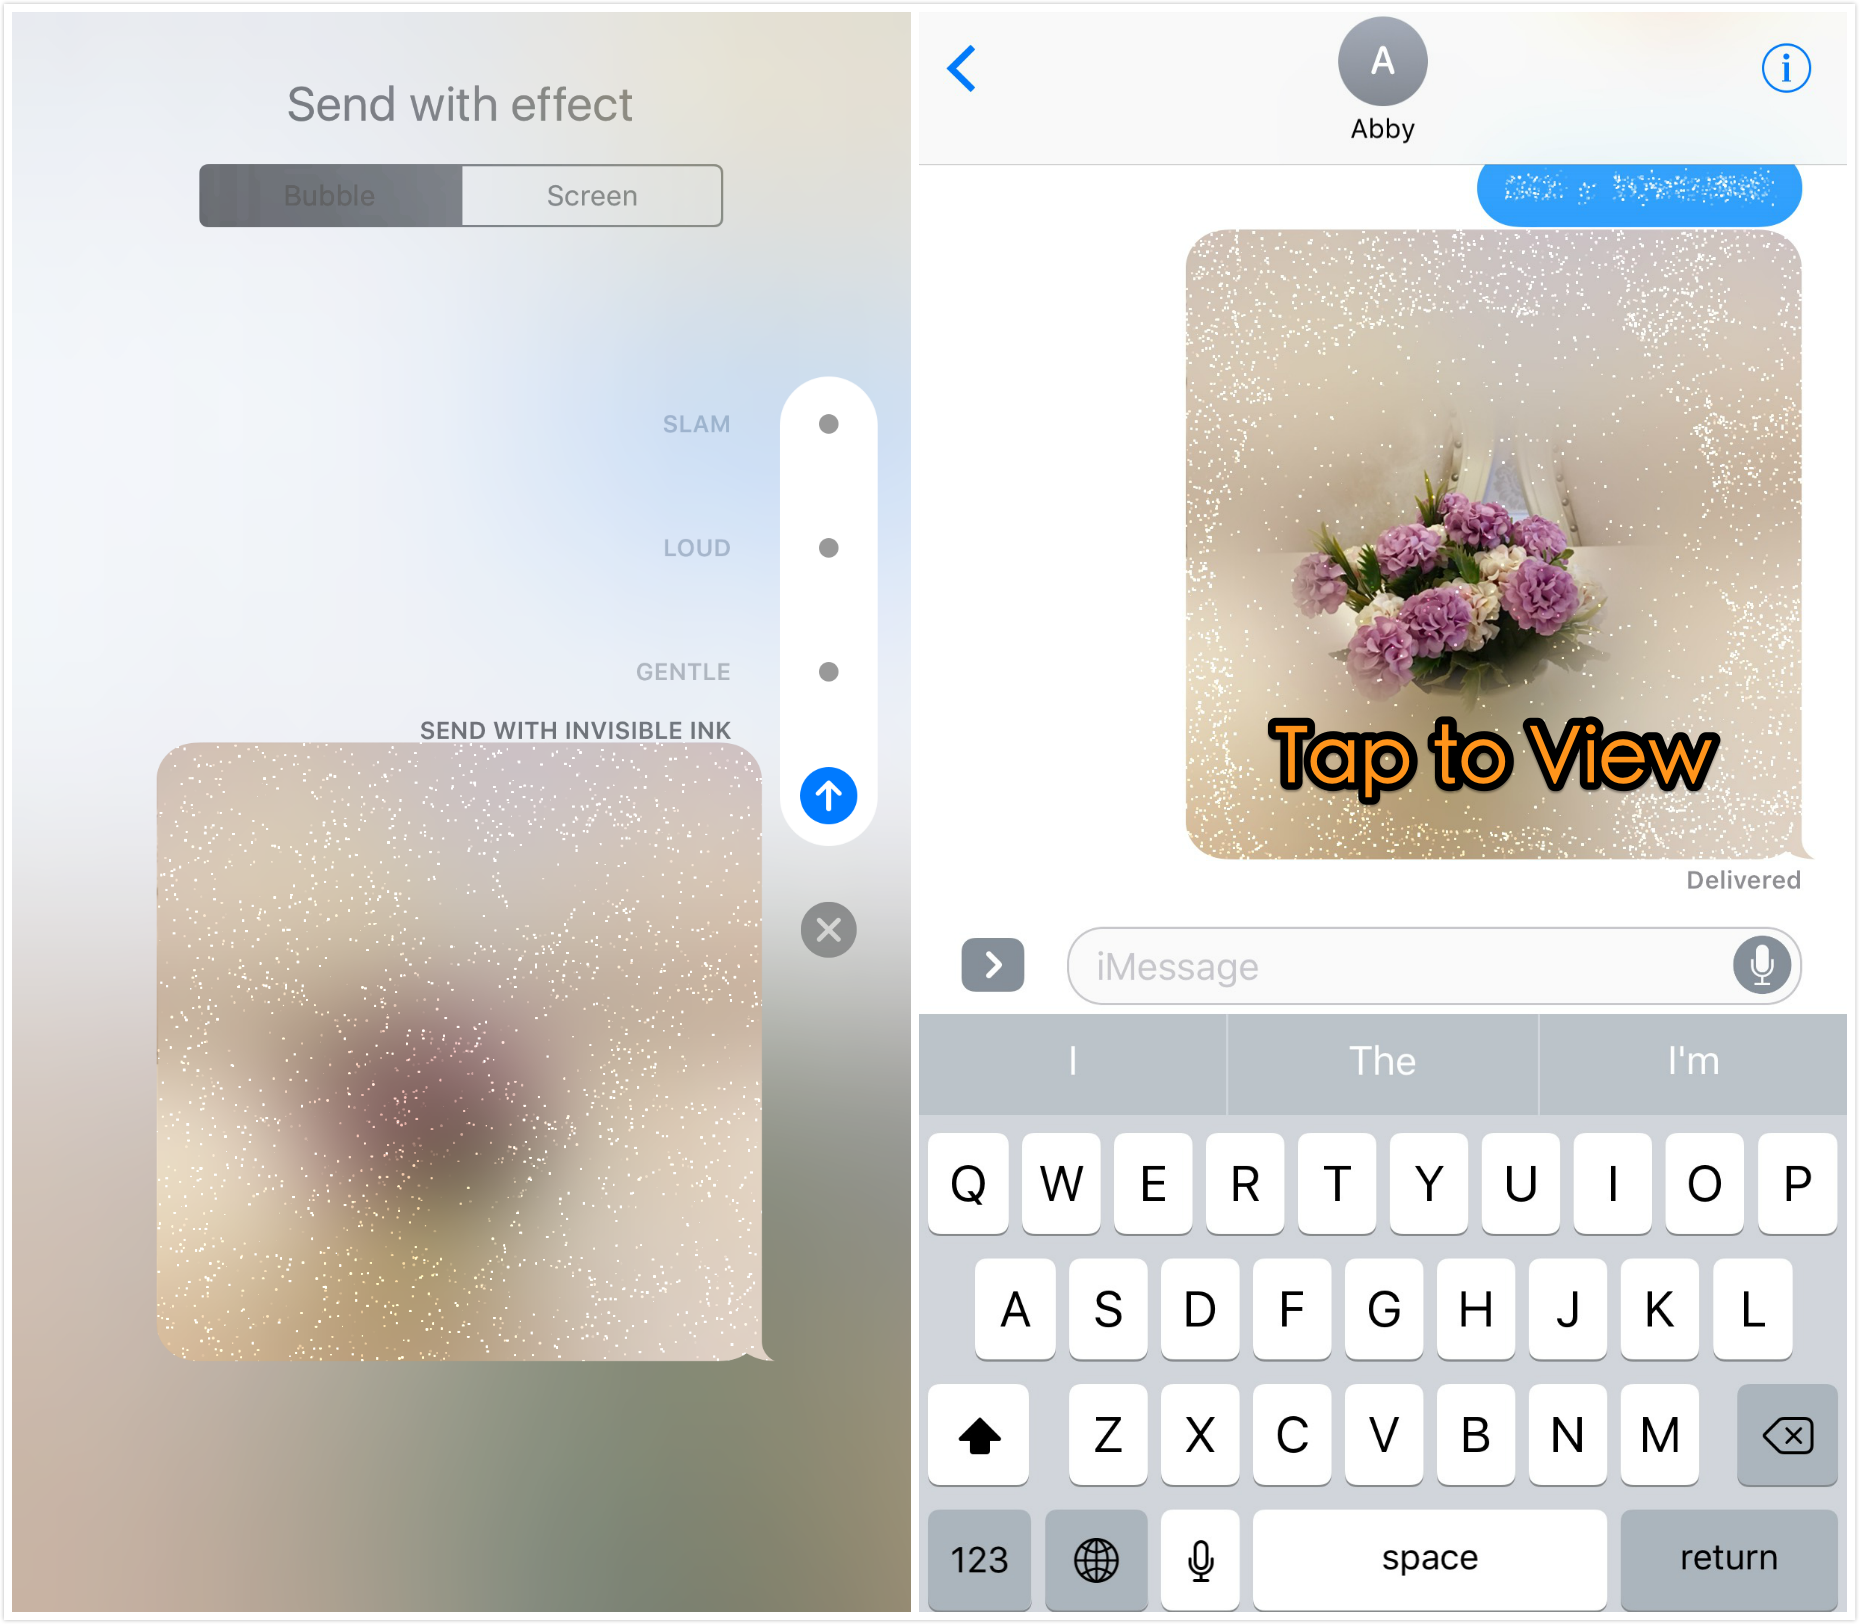 How to Send and View Hidden Messages on iOS 11/iOS 10